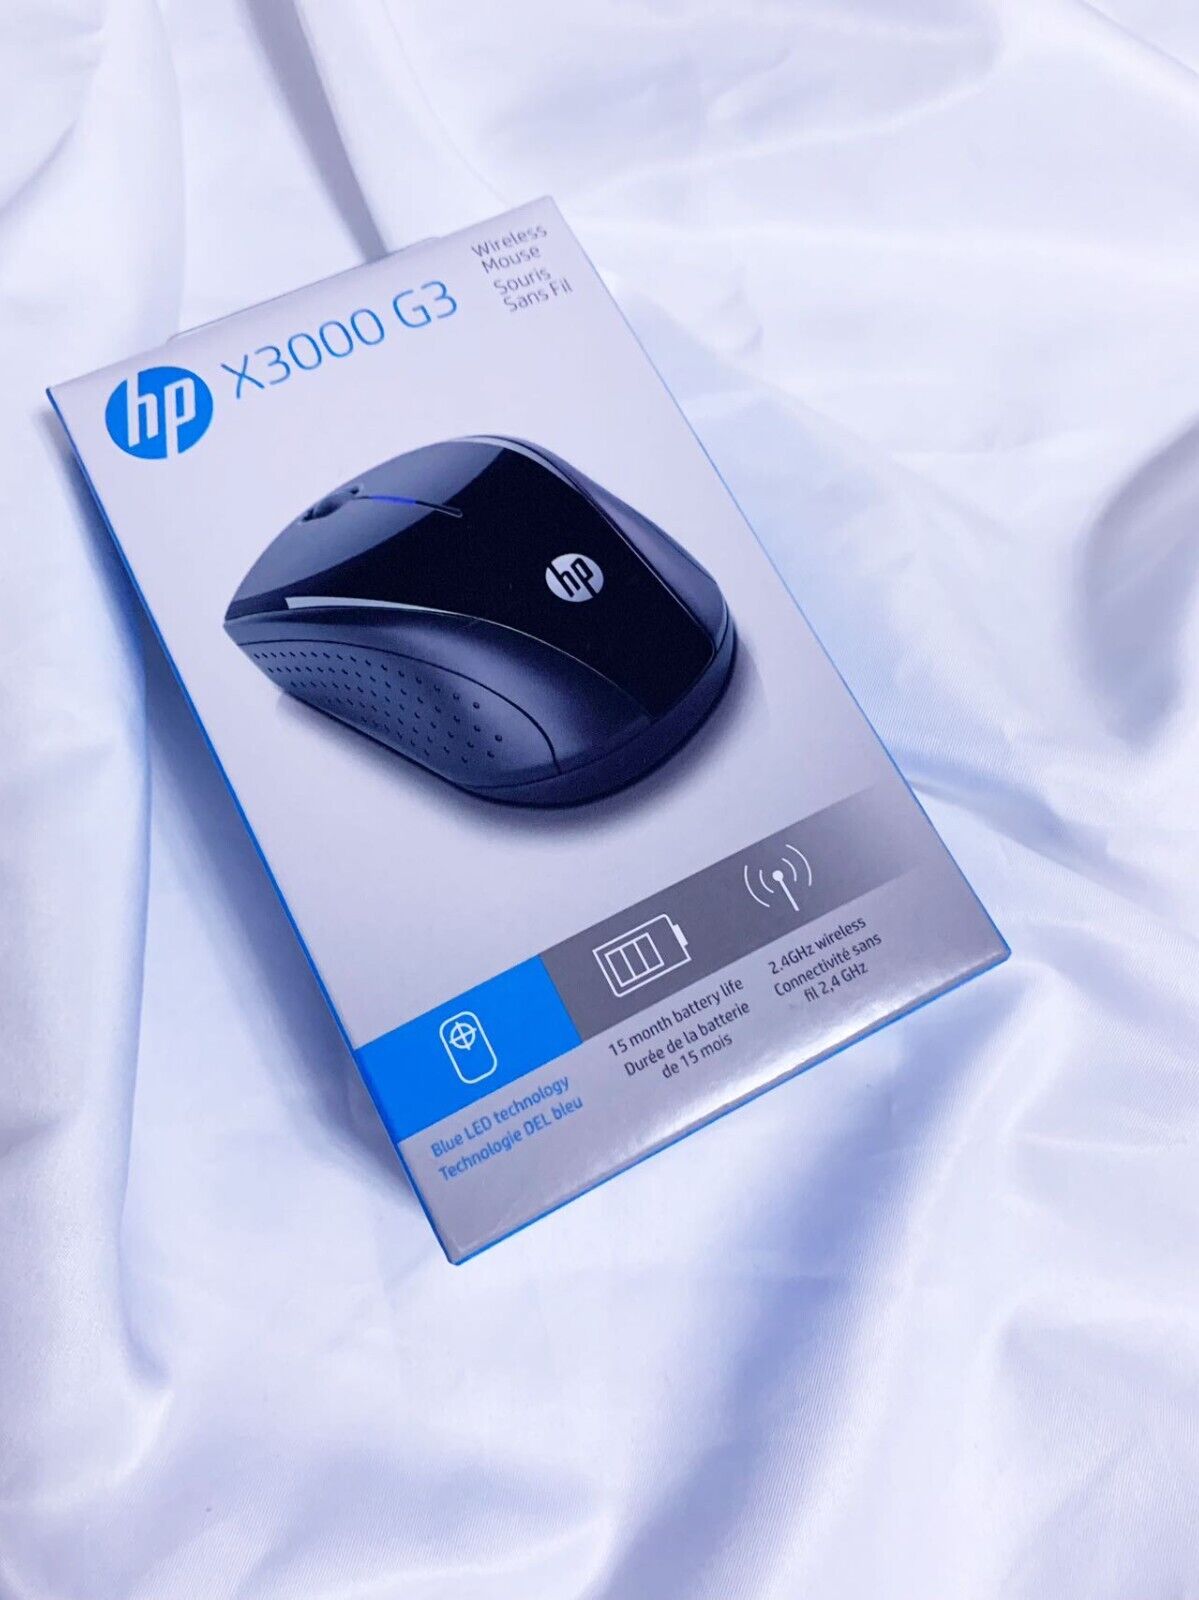 HP X3000 G3 Wireless Mouse New